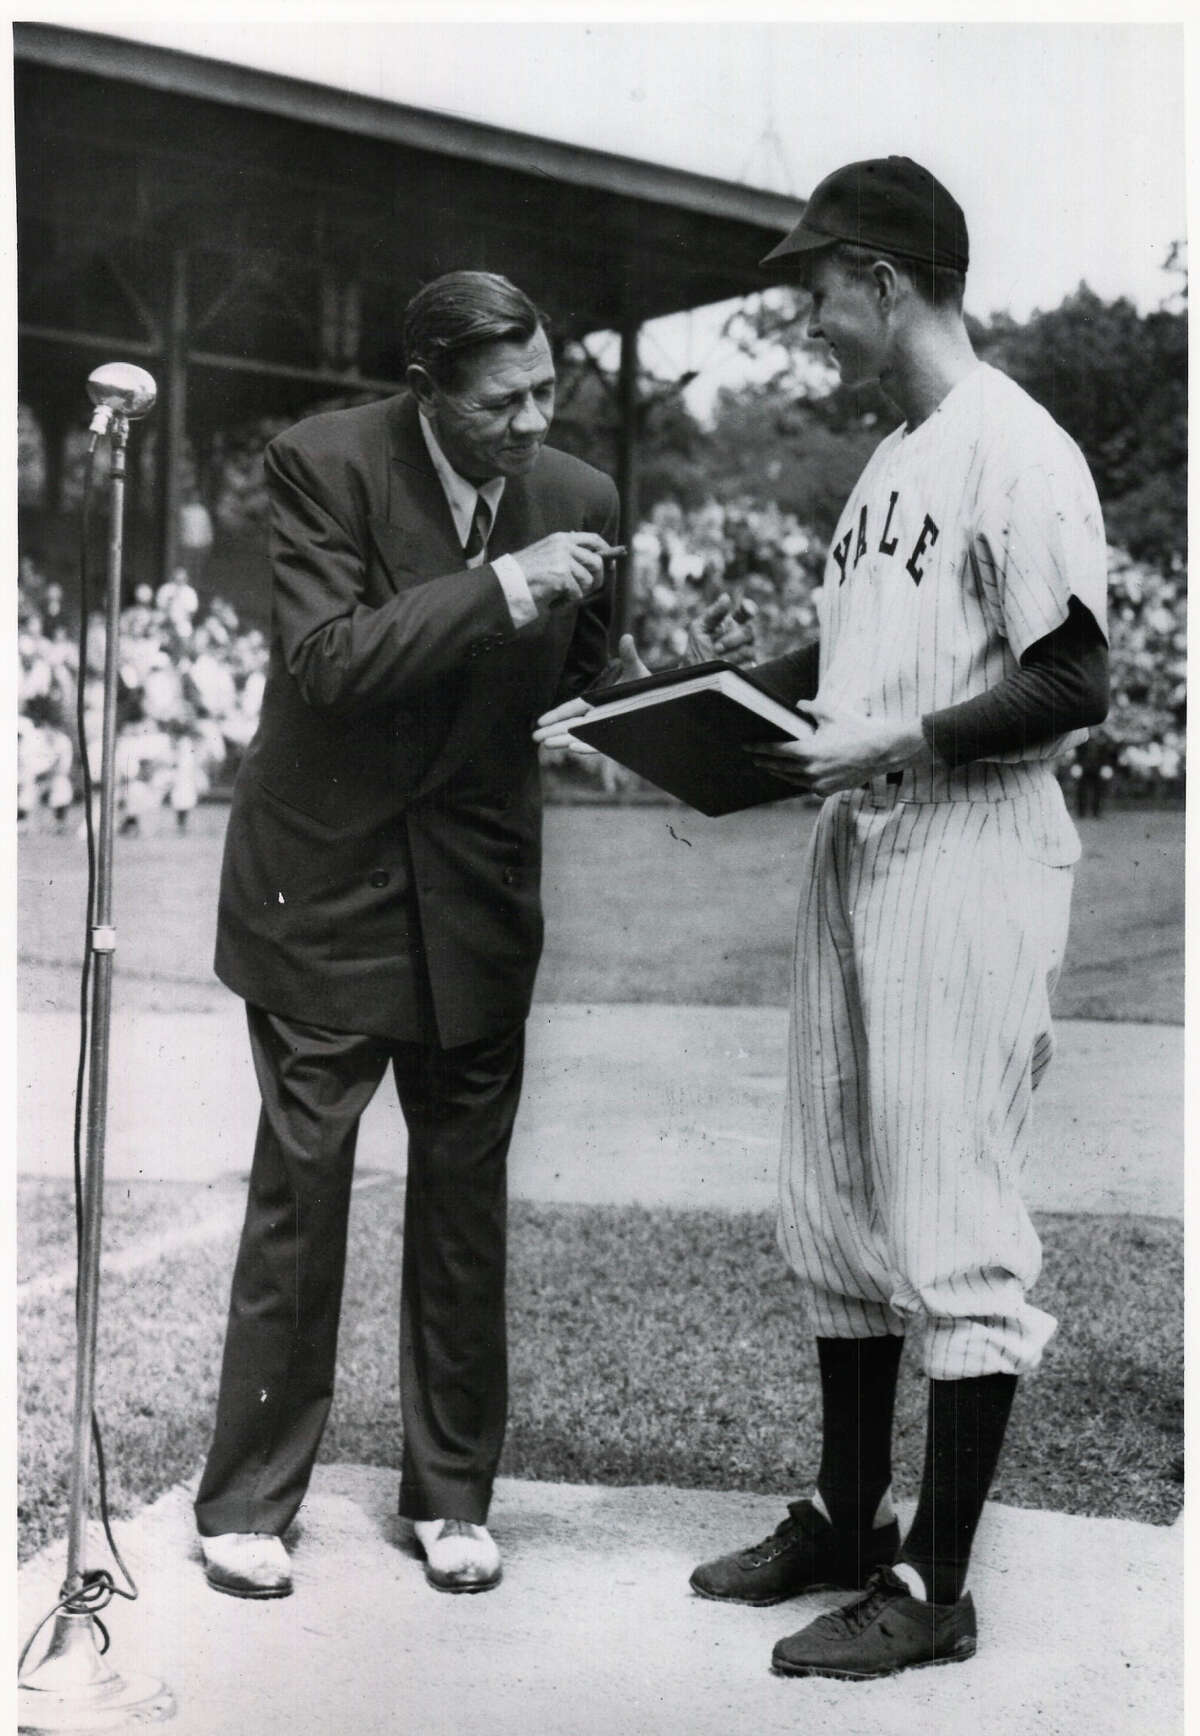 George H.W. Bush welcomes "Babe" Ruth at a pre-game ceremony at the Yale University Field in June 1948. Bush was then captain of the 1948 varsity team. It was one of Ruth's last public appearances as he died later that summer. The photo notes it was donated to the New Haven Register on May 31, 1991 by the Yale University Office of Official Affairs